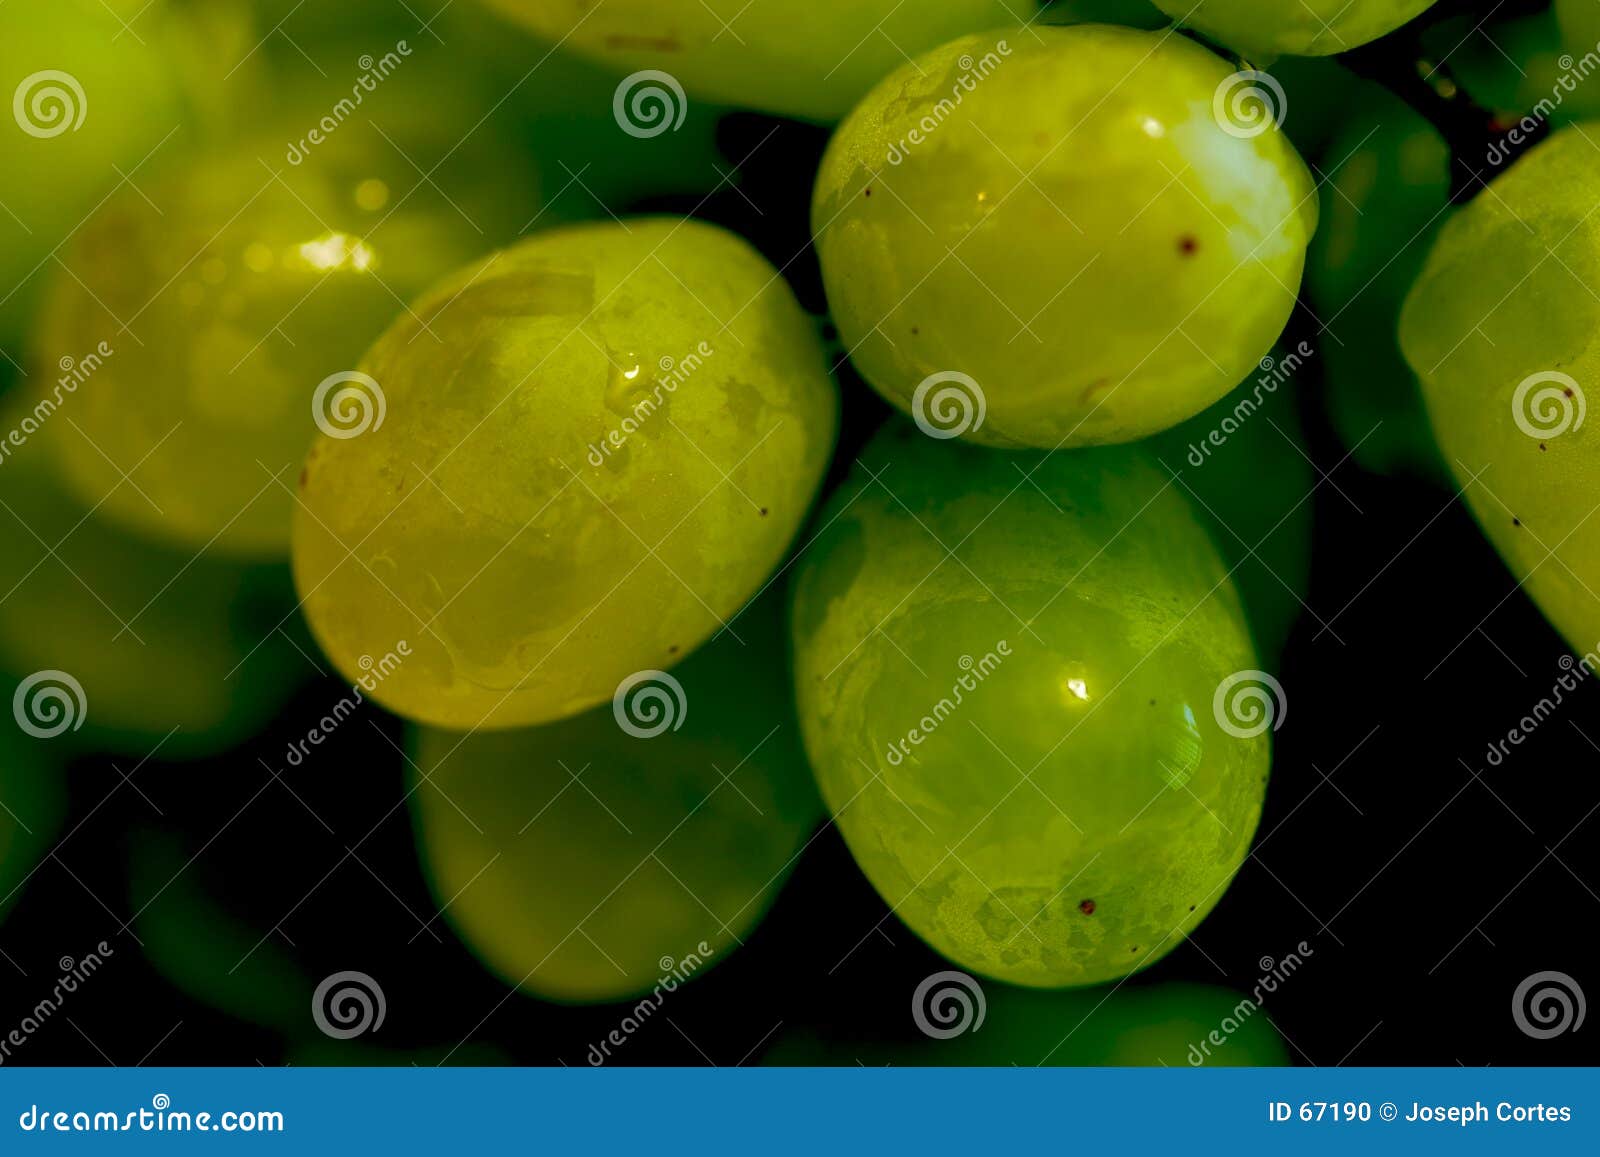 Close-up of some Green Grapes